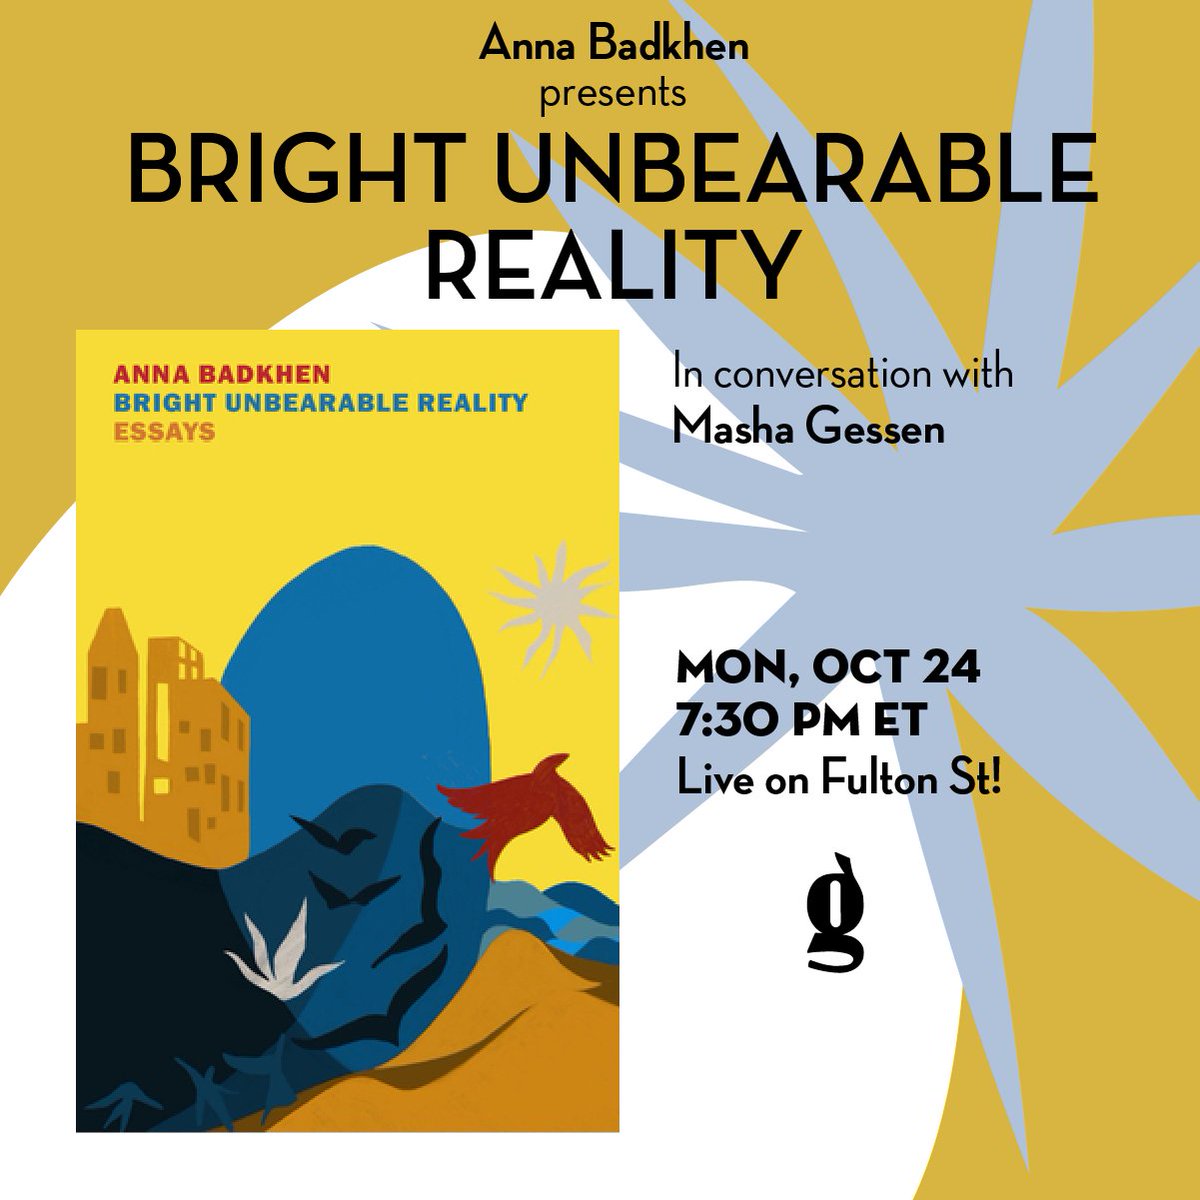 Join Anna Badkhen—'a stunning and sensitive chronicler of our collective condition' (@imaniperry)—at our Fulton St store TOMORROW for the momentous release of BRIGHT UNBEARABLE REALITY (@nybooks)! @mashagessen joins Badkhen in conversation! RSVP: anna-badkhen.eventbrite.com